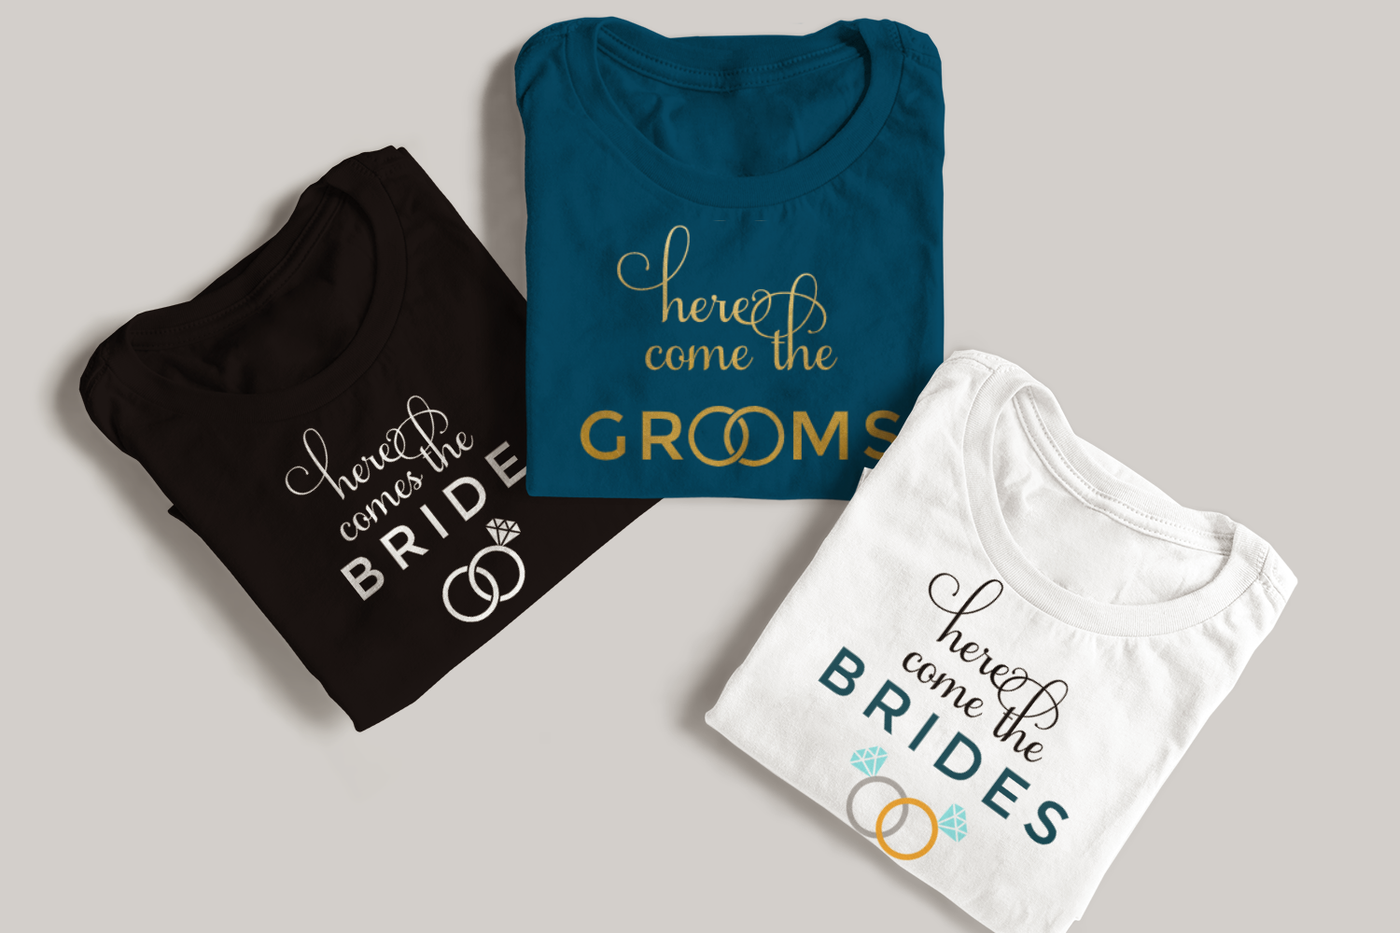 Three folded tees. They say "Here comes the Bride," Here come the Grooms," and "here come the Brides" with rings incorporated into the design.